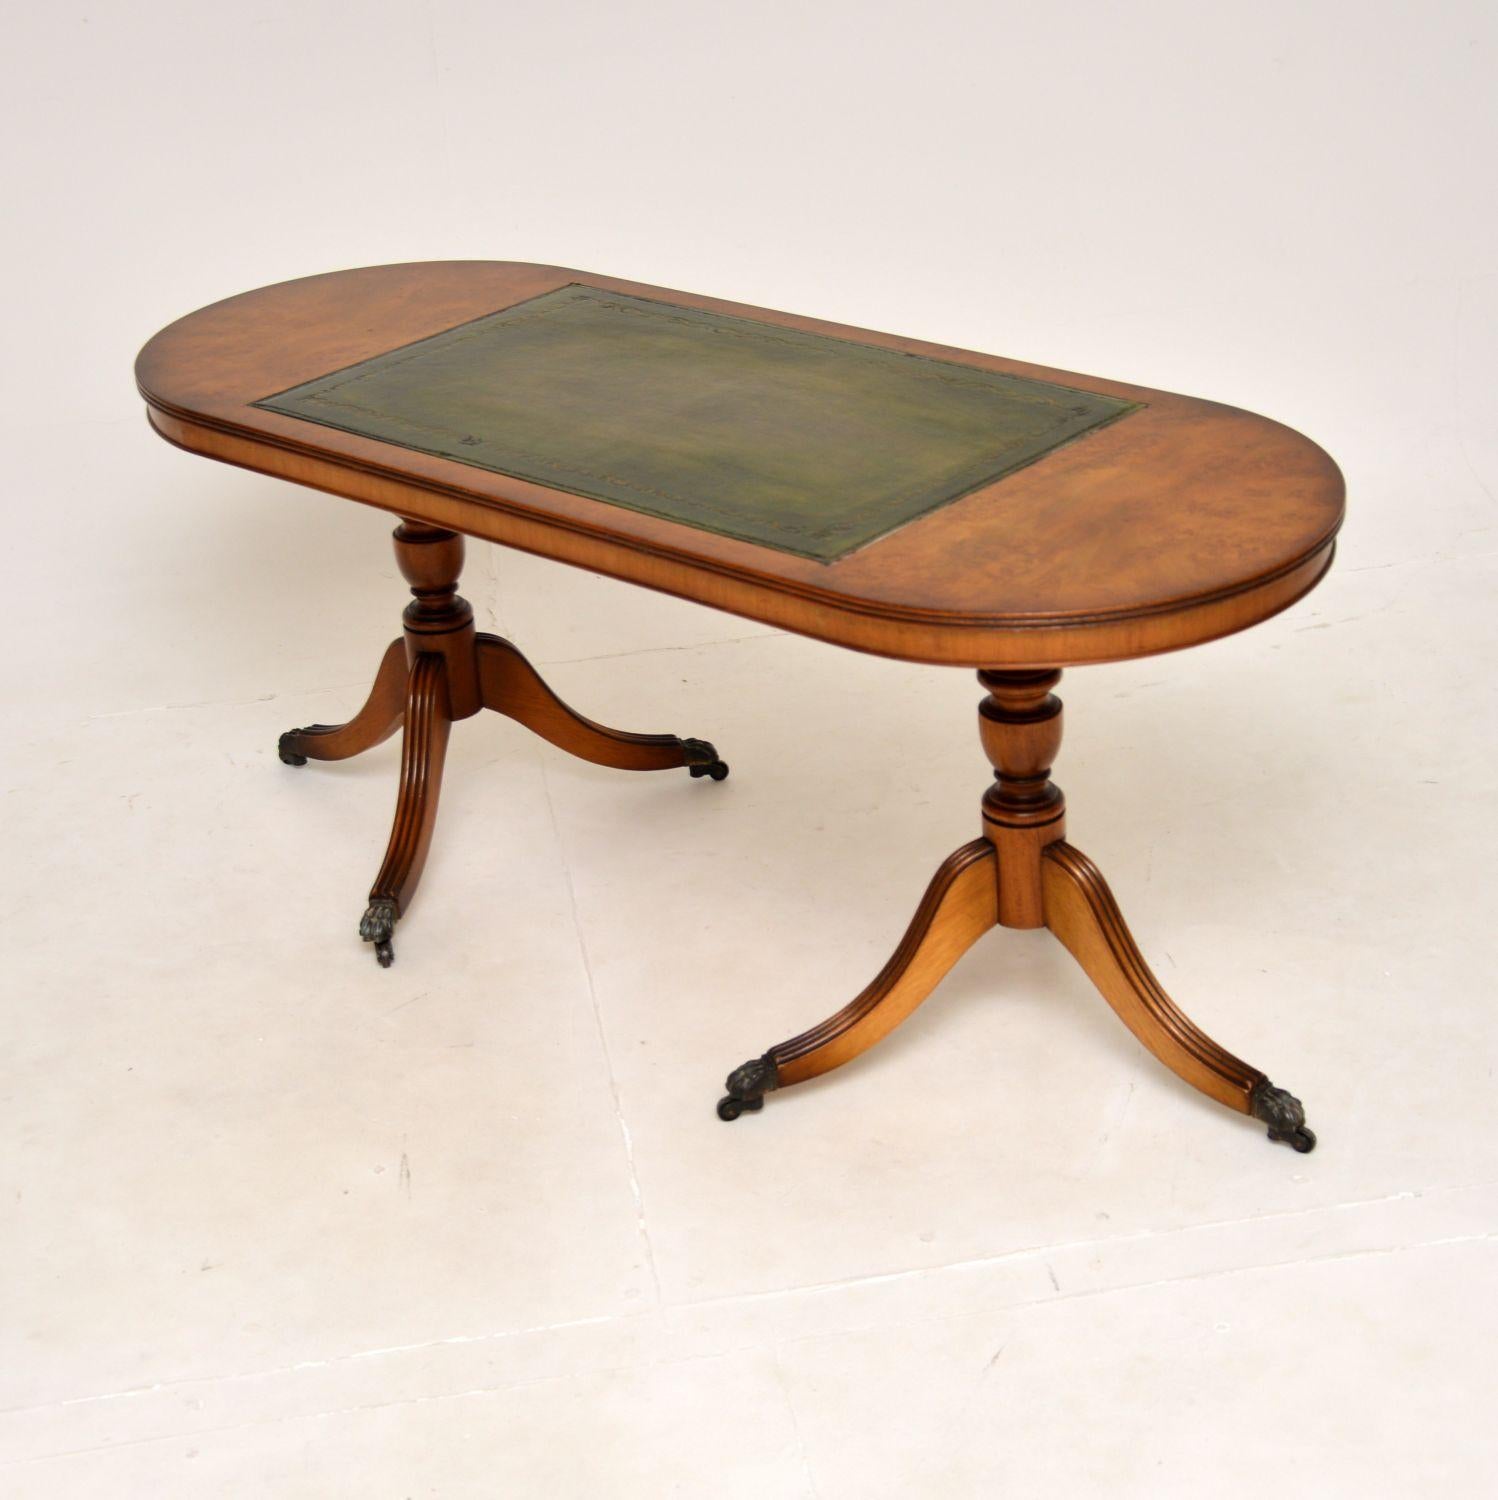 British Antique Regency Style Walnut and Leather Coffee Table For Sale